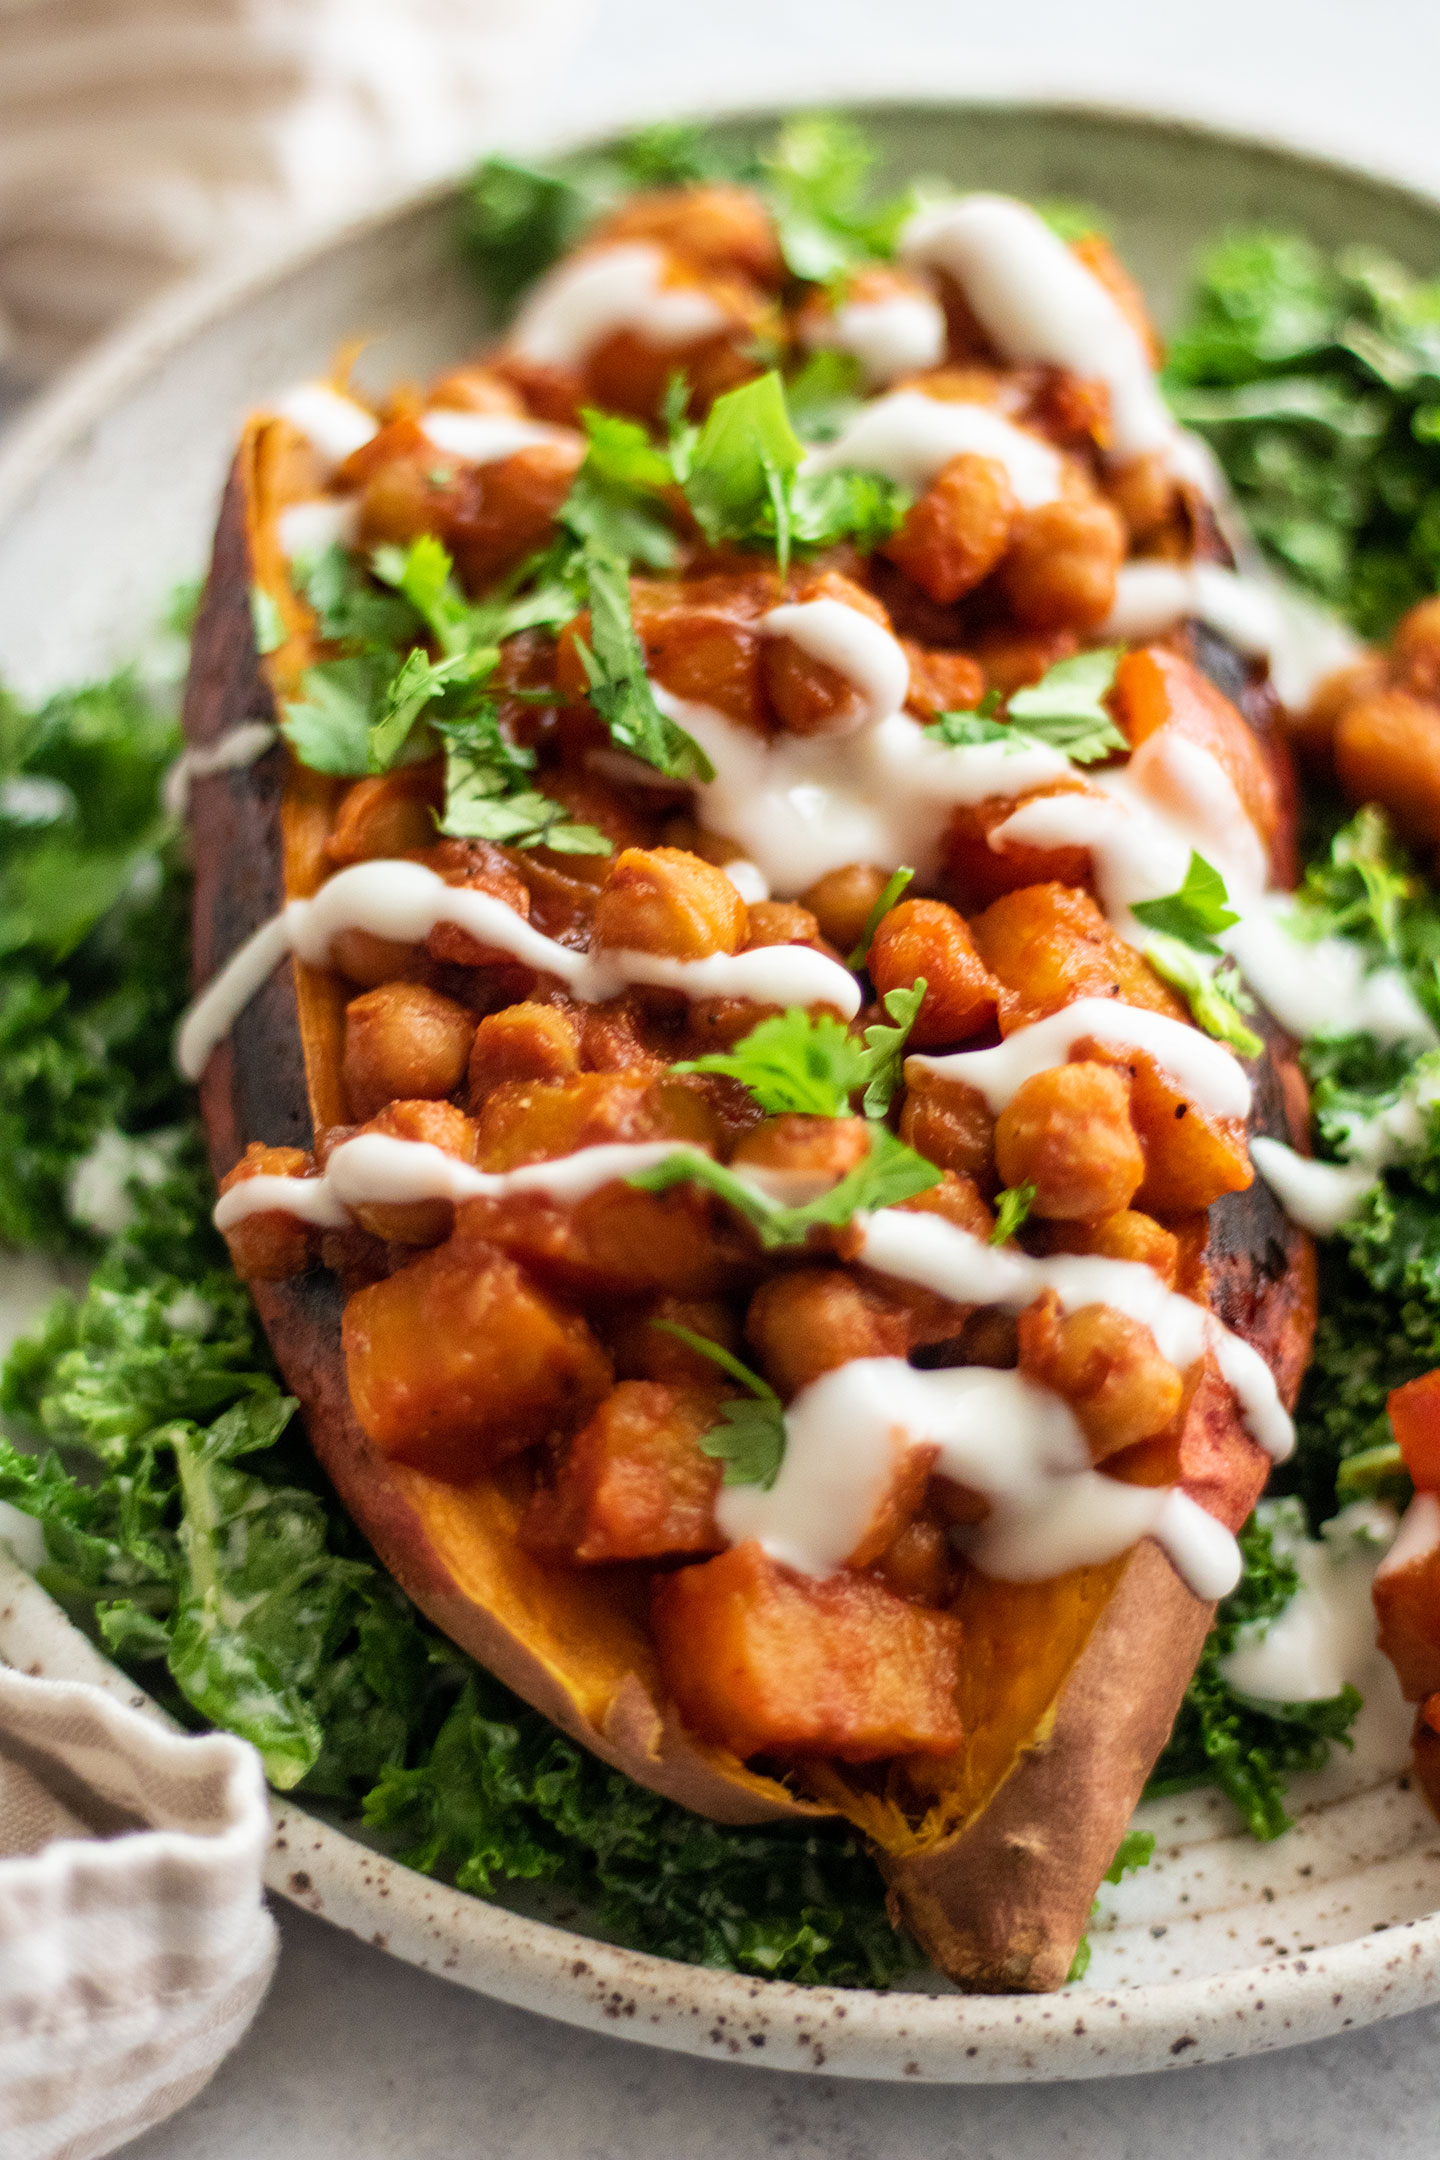 Side view of a large sweet potato loaded with barbecue chickpeas and topped with a creamy yogurt sauce and served over a bed of massaged kale.